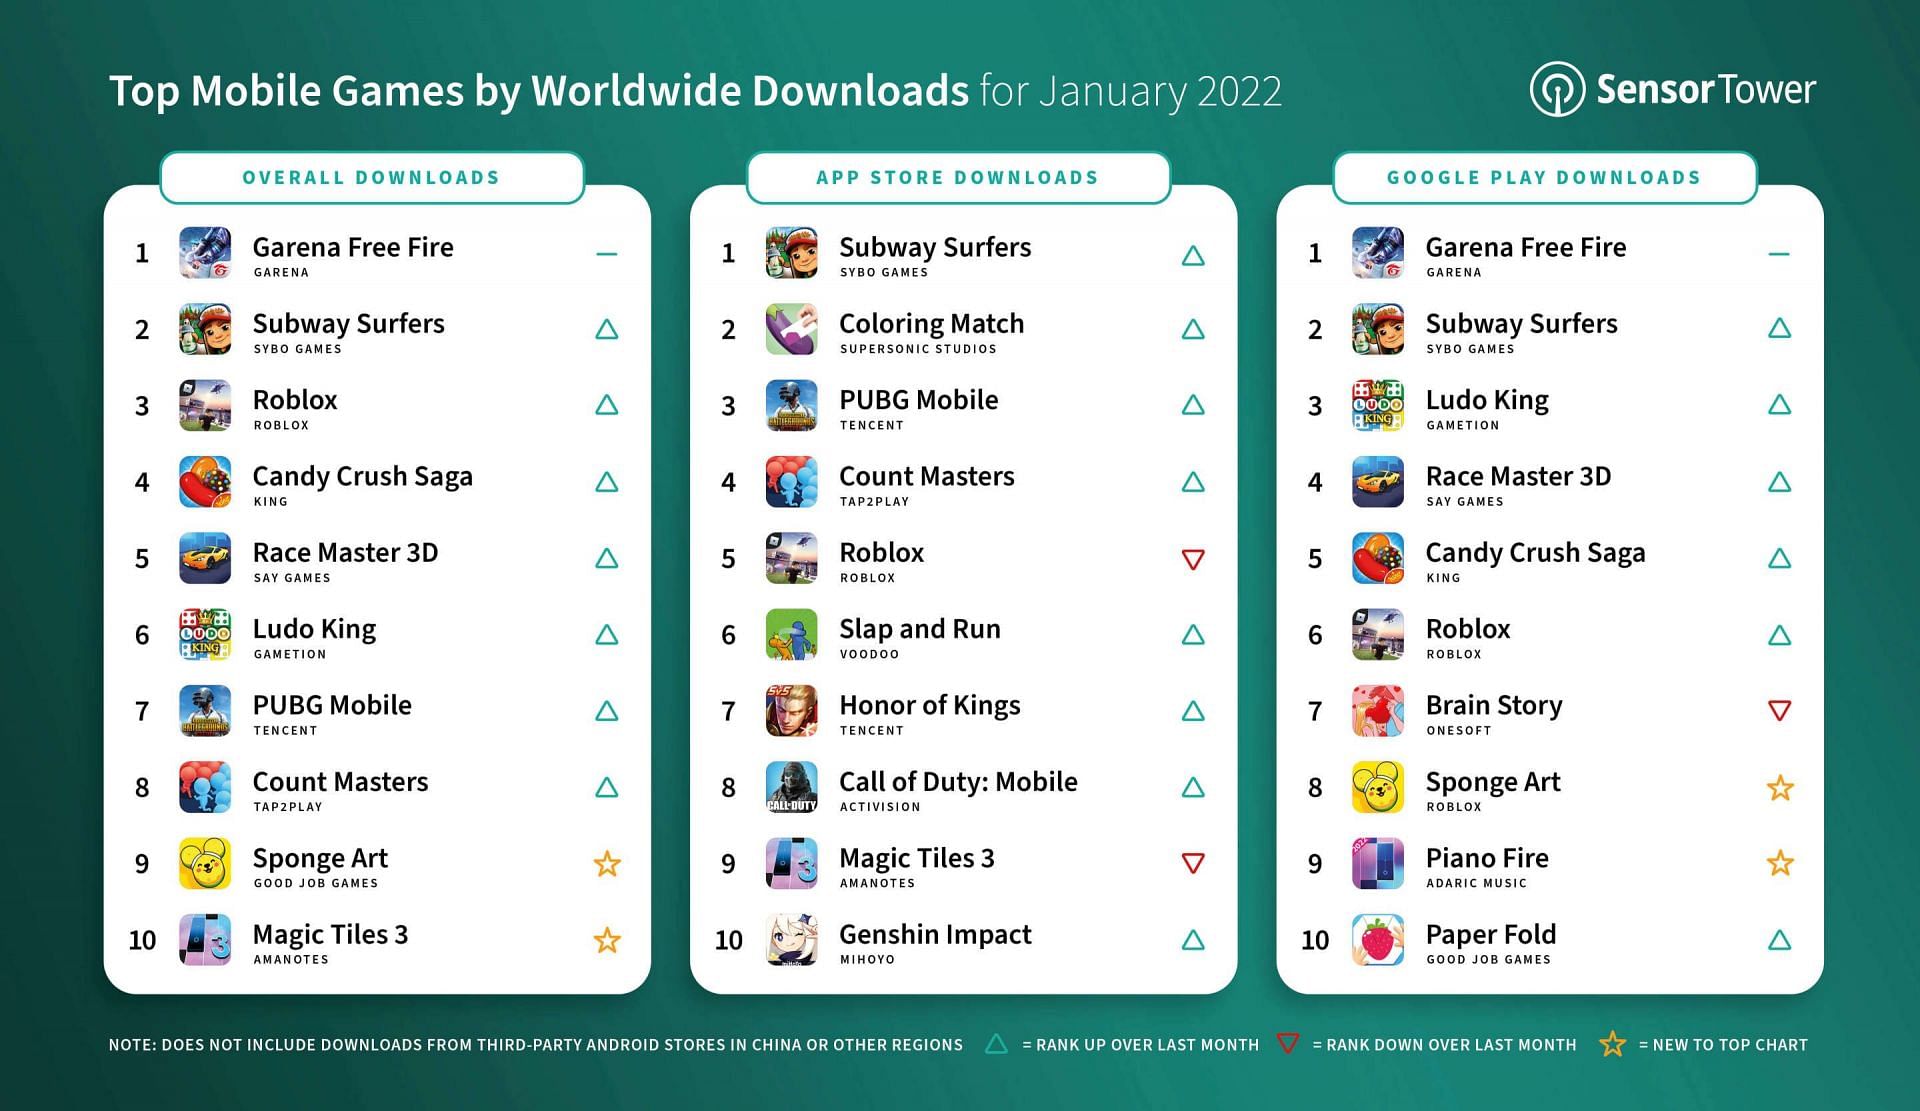 Top mobile games by downloads in January 2022 (image via Sensor Tower)